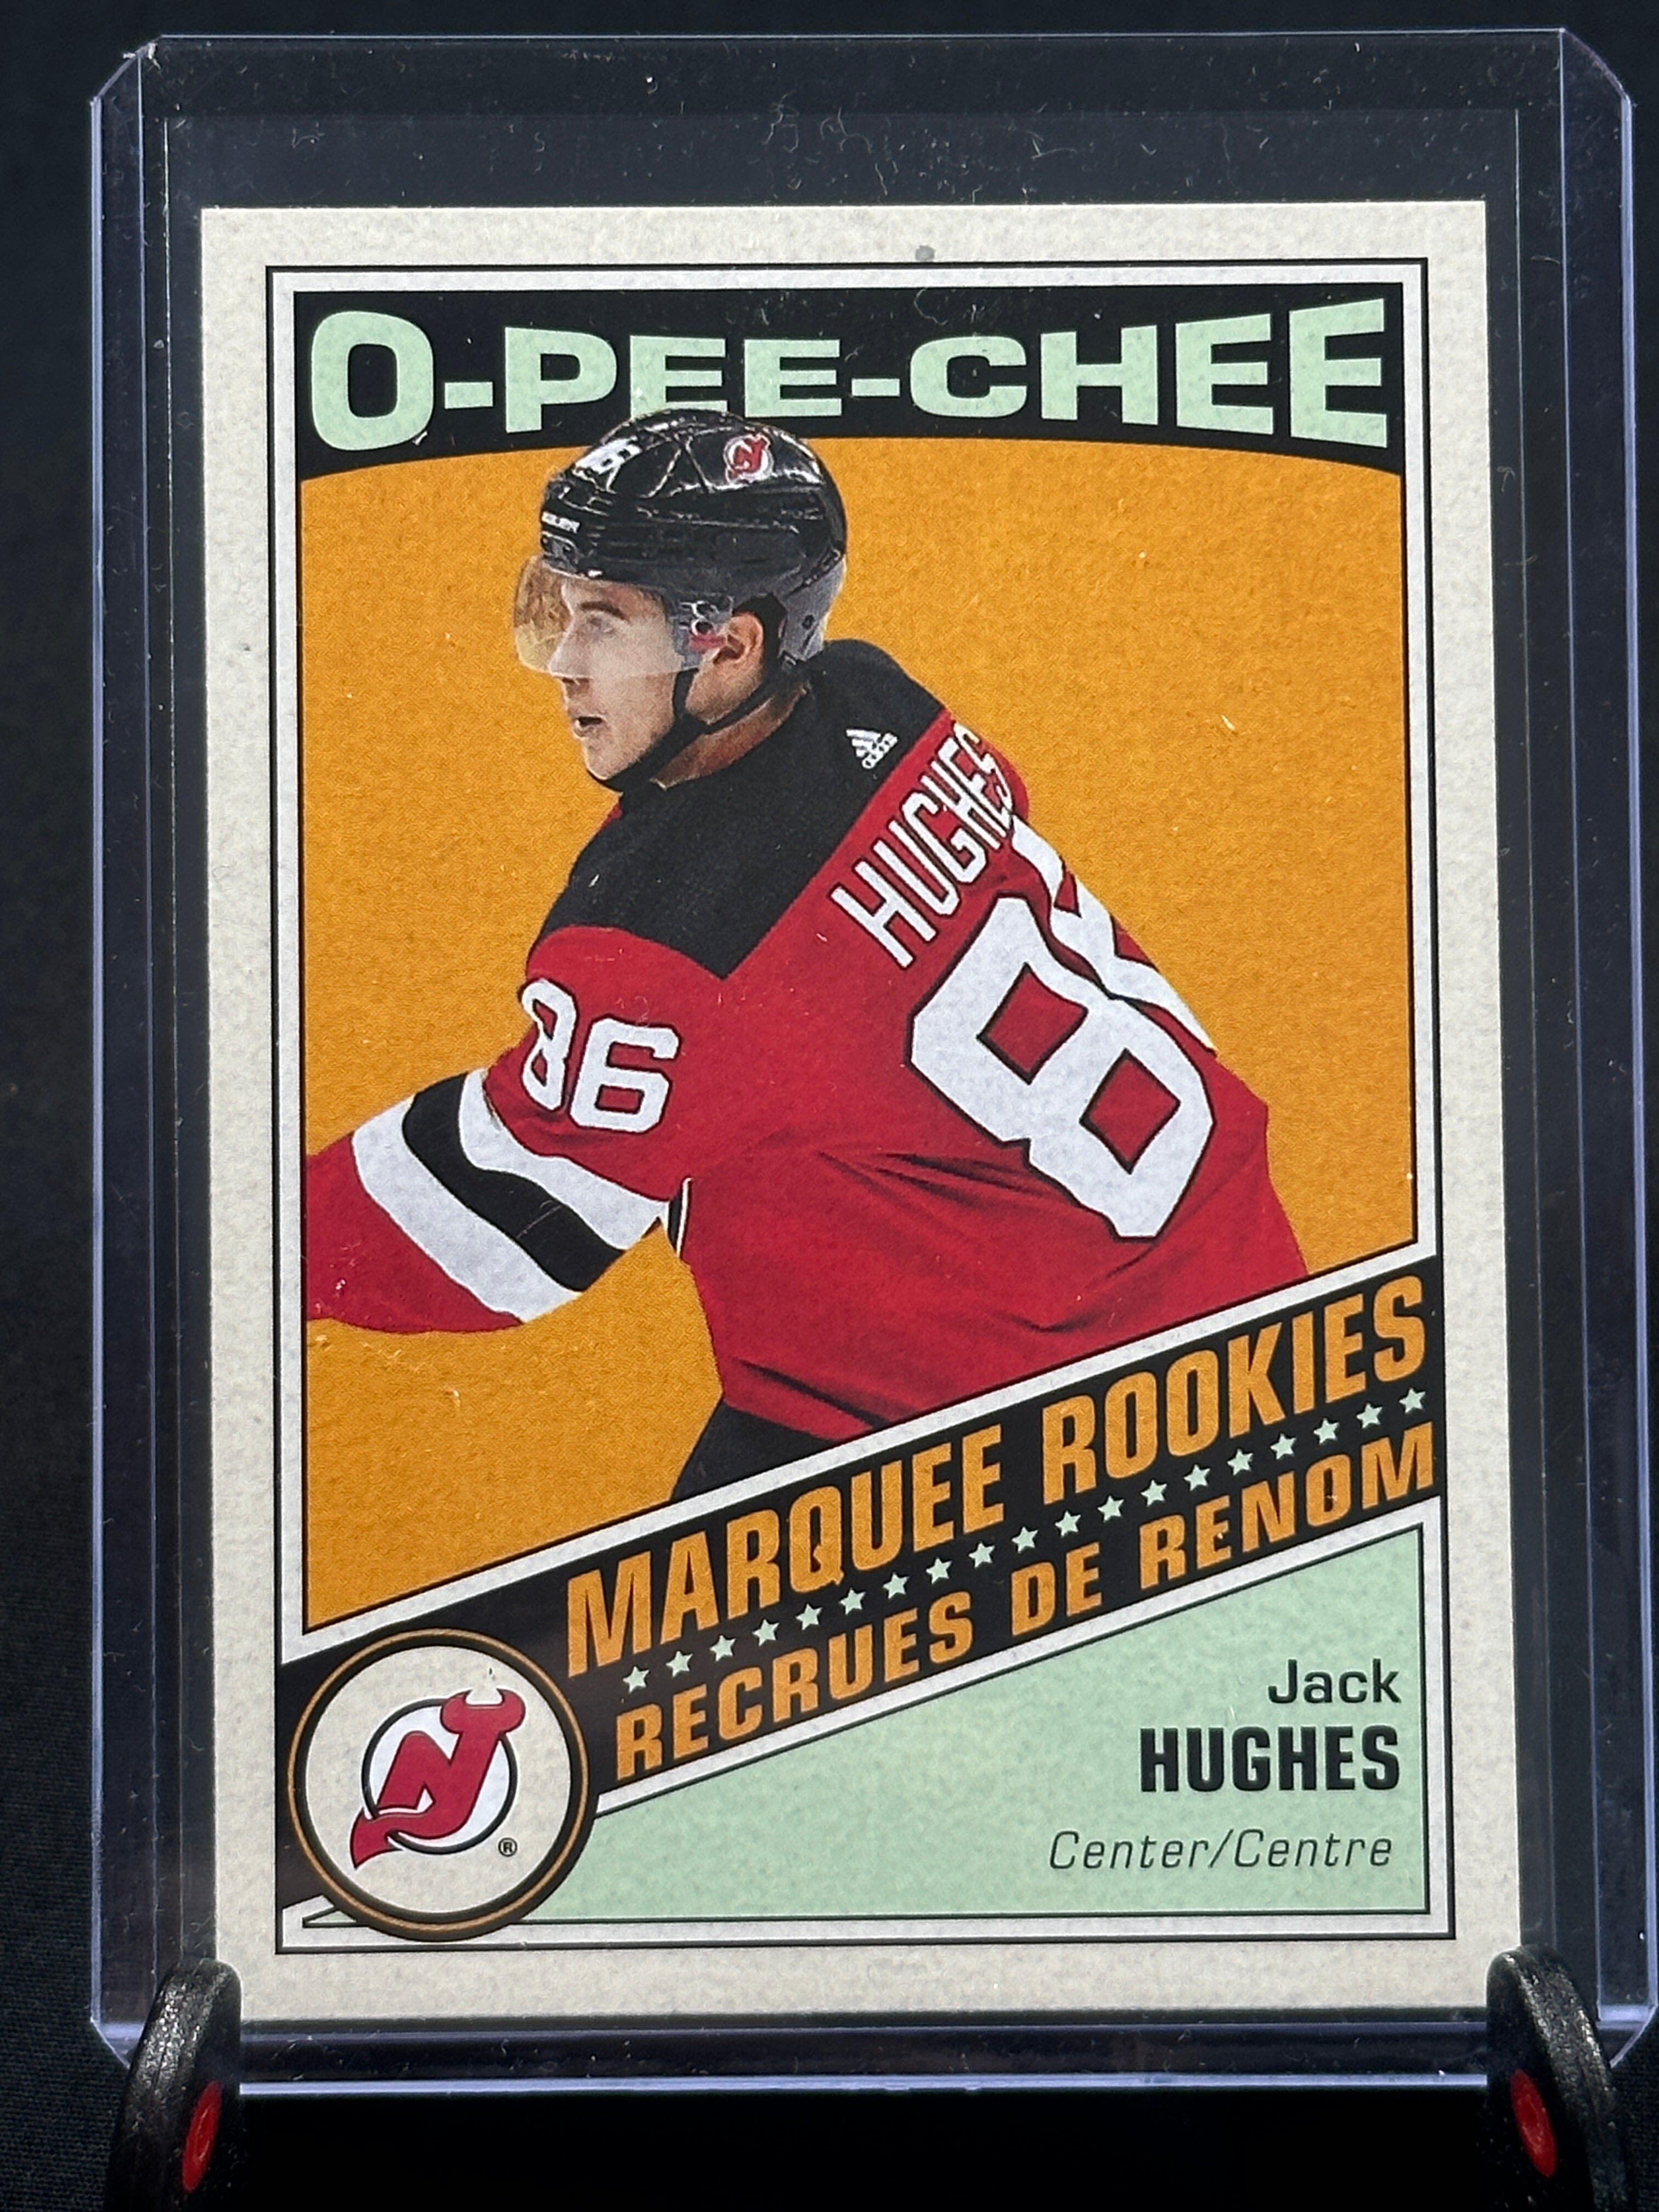 2019-2020 Jack Hughes O Pee Chee Retro Marquee Rookies New Jersey Devils RC # 611 Shootnscore.com 